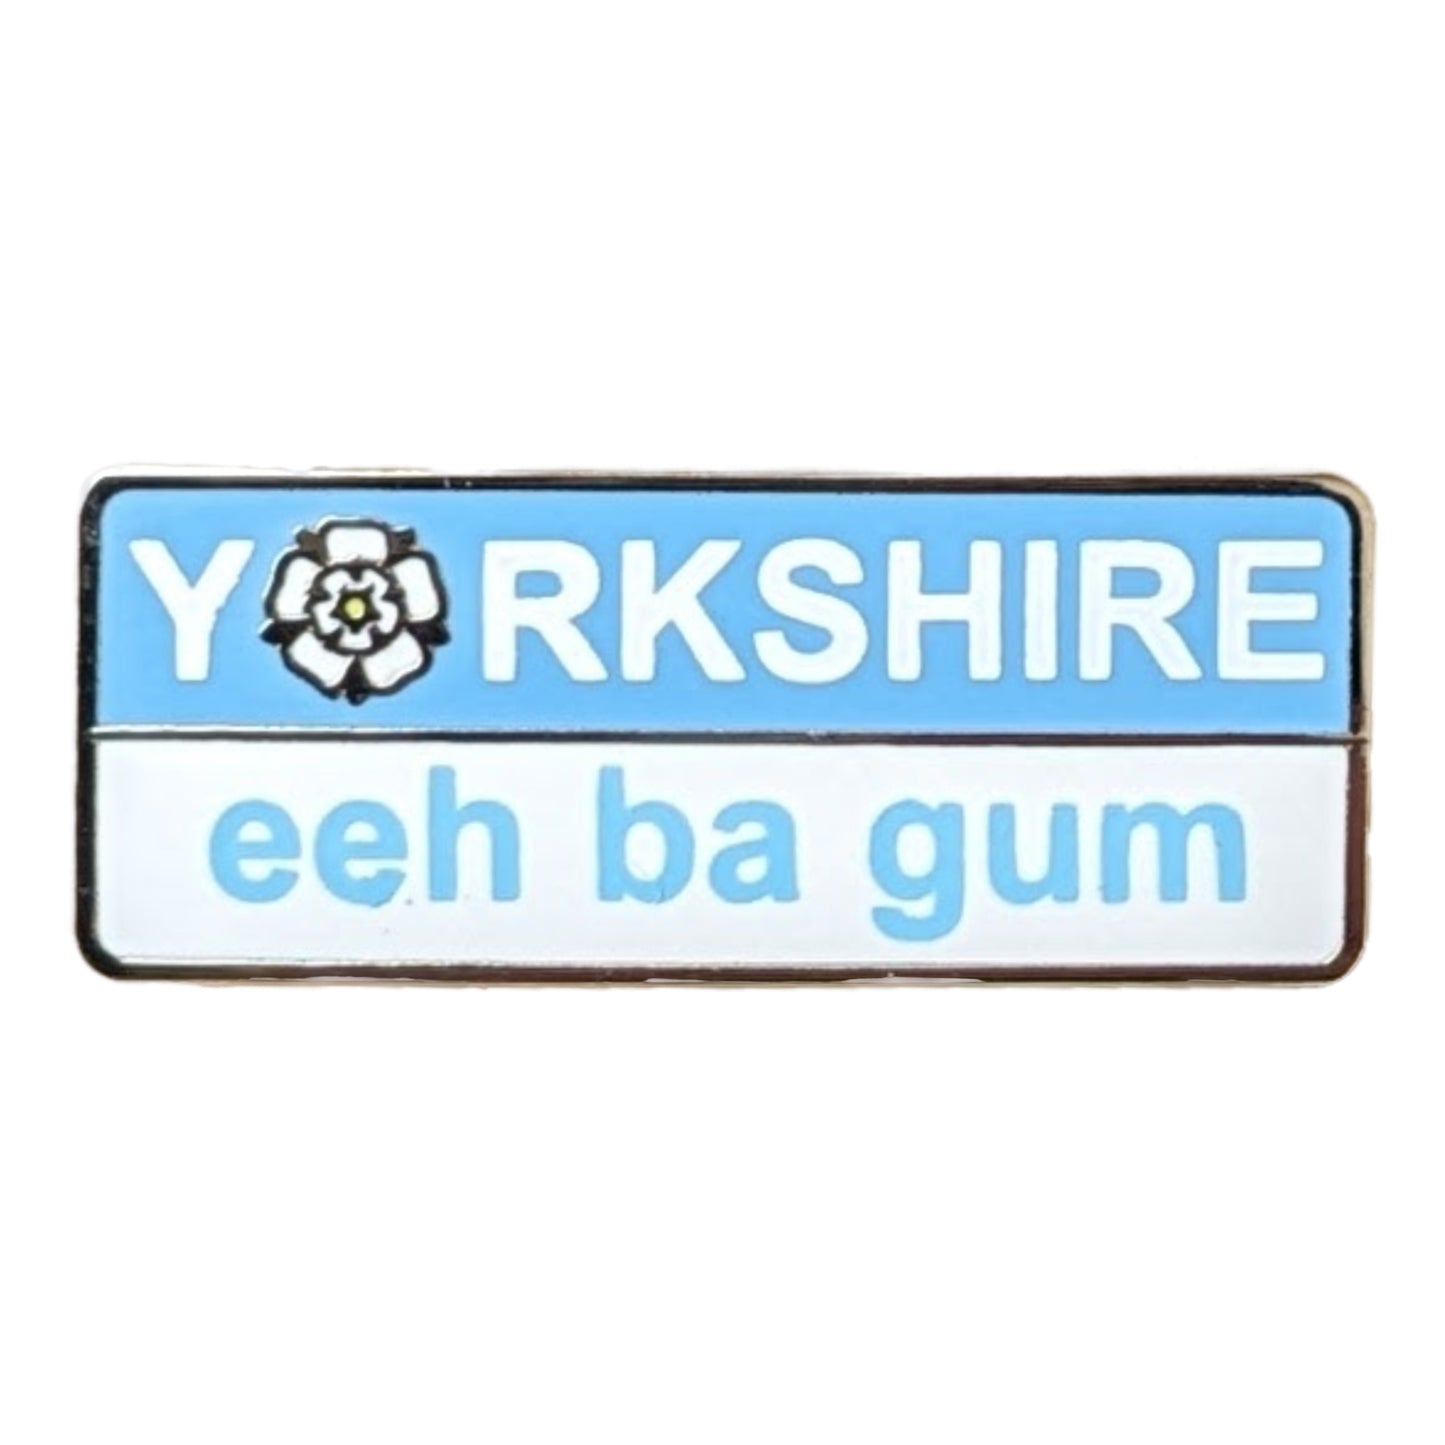 Eeh Ba Gum Yorkshire Phrase Pin Badge - The Great Yorkshire Shop